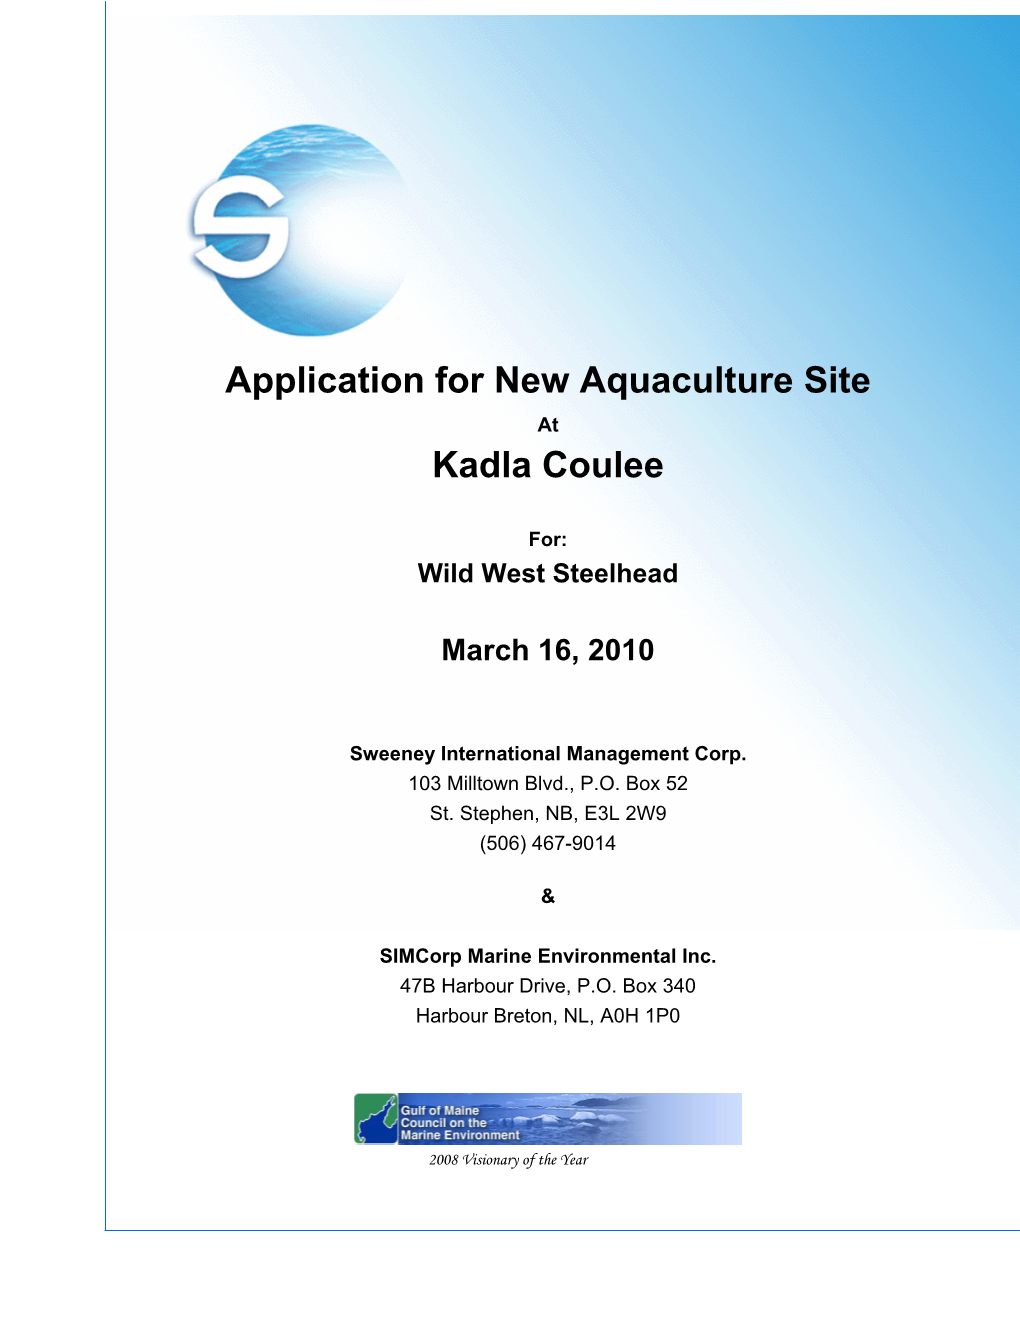 Application for New Aquaculture Site Kadla Coulee